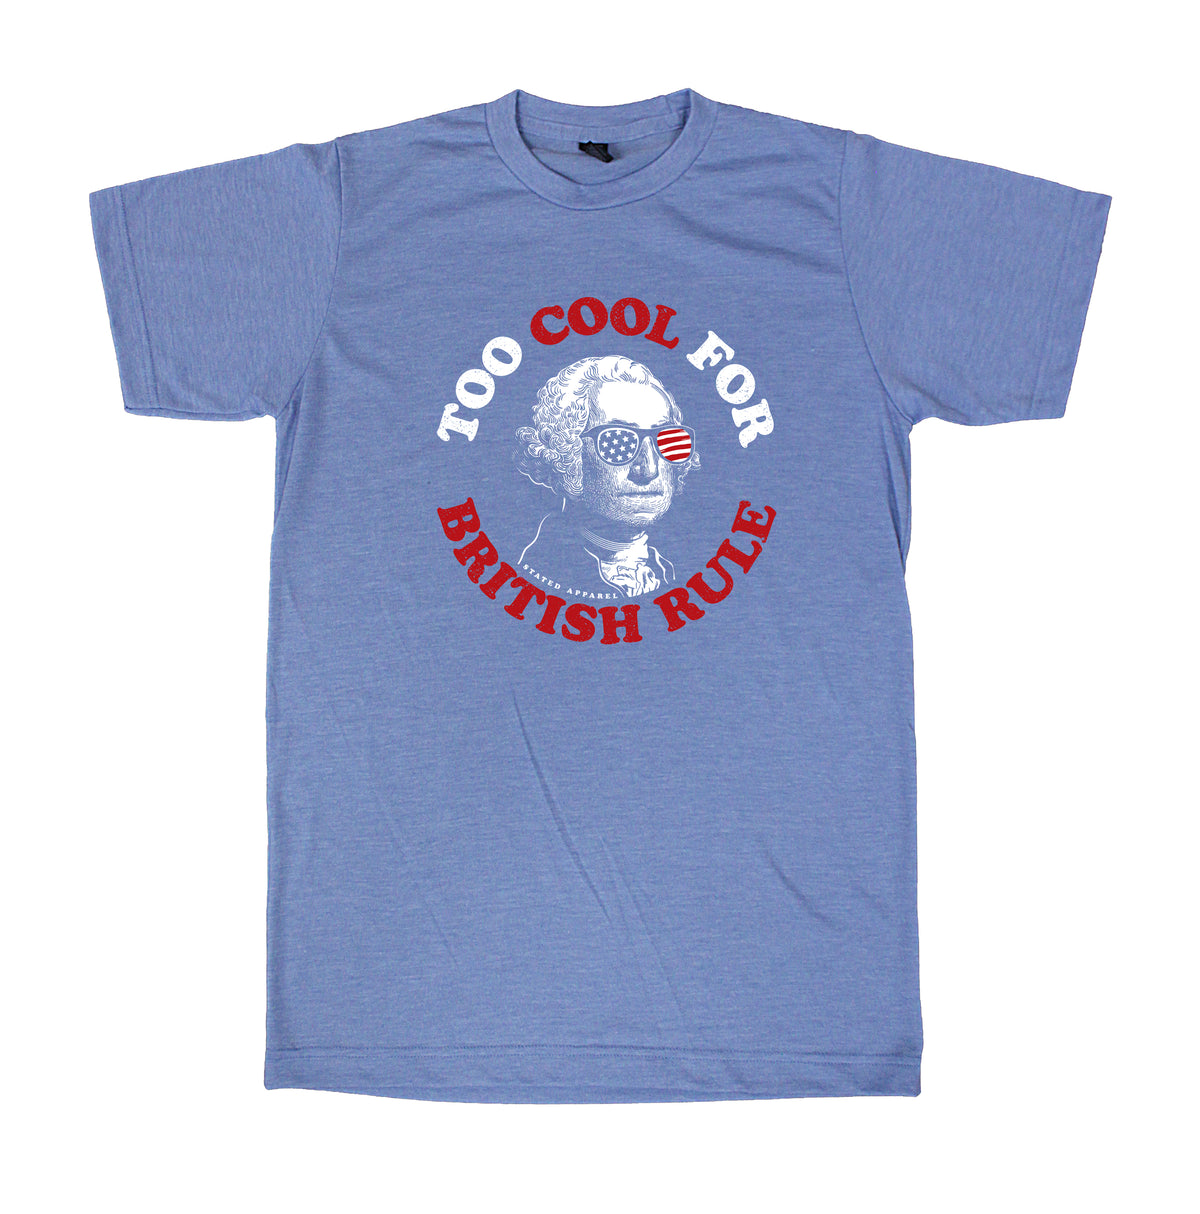 Too Cool For British Rule Tee